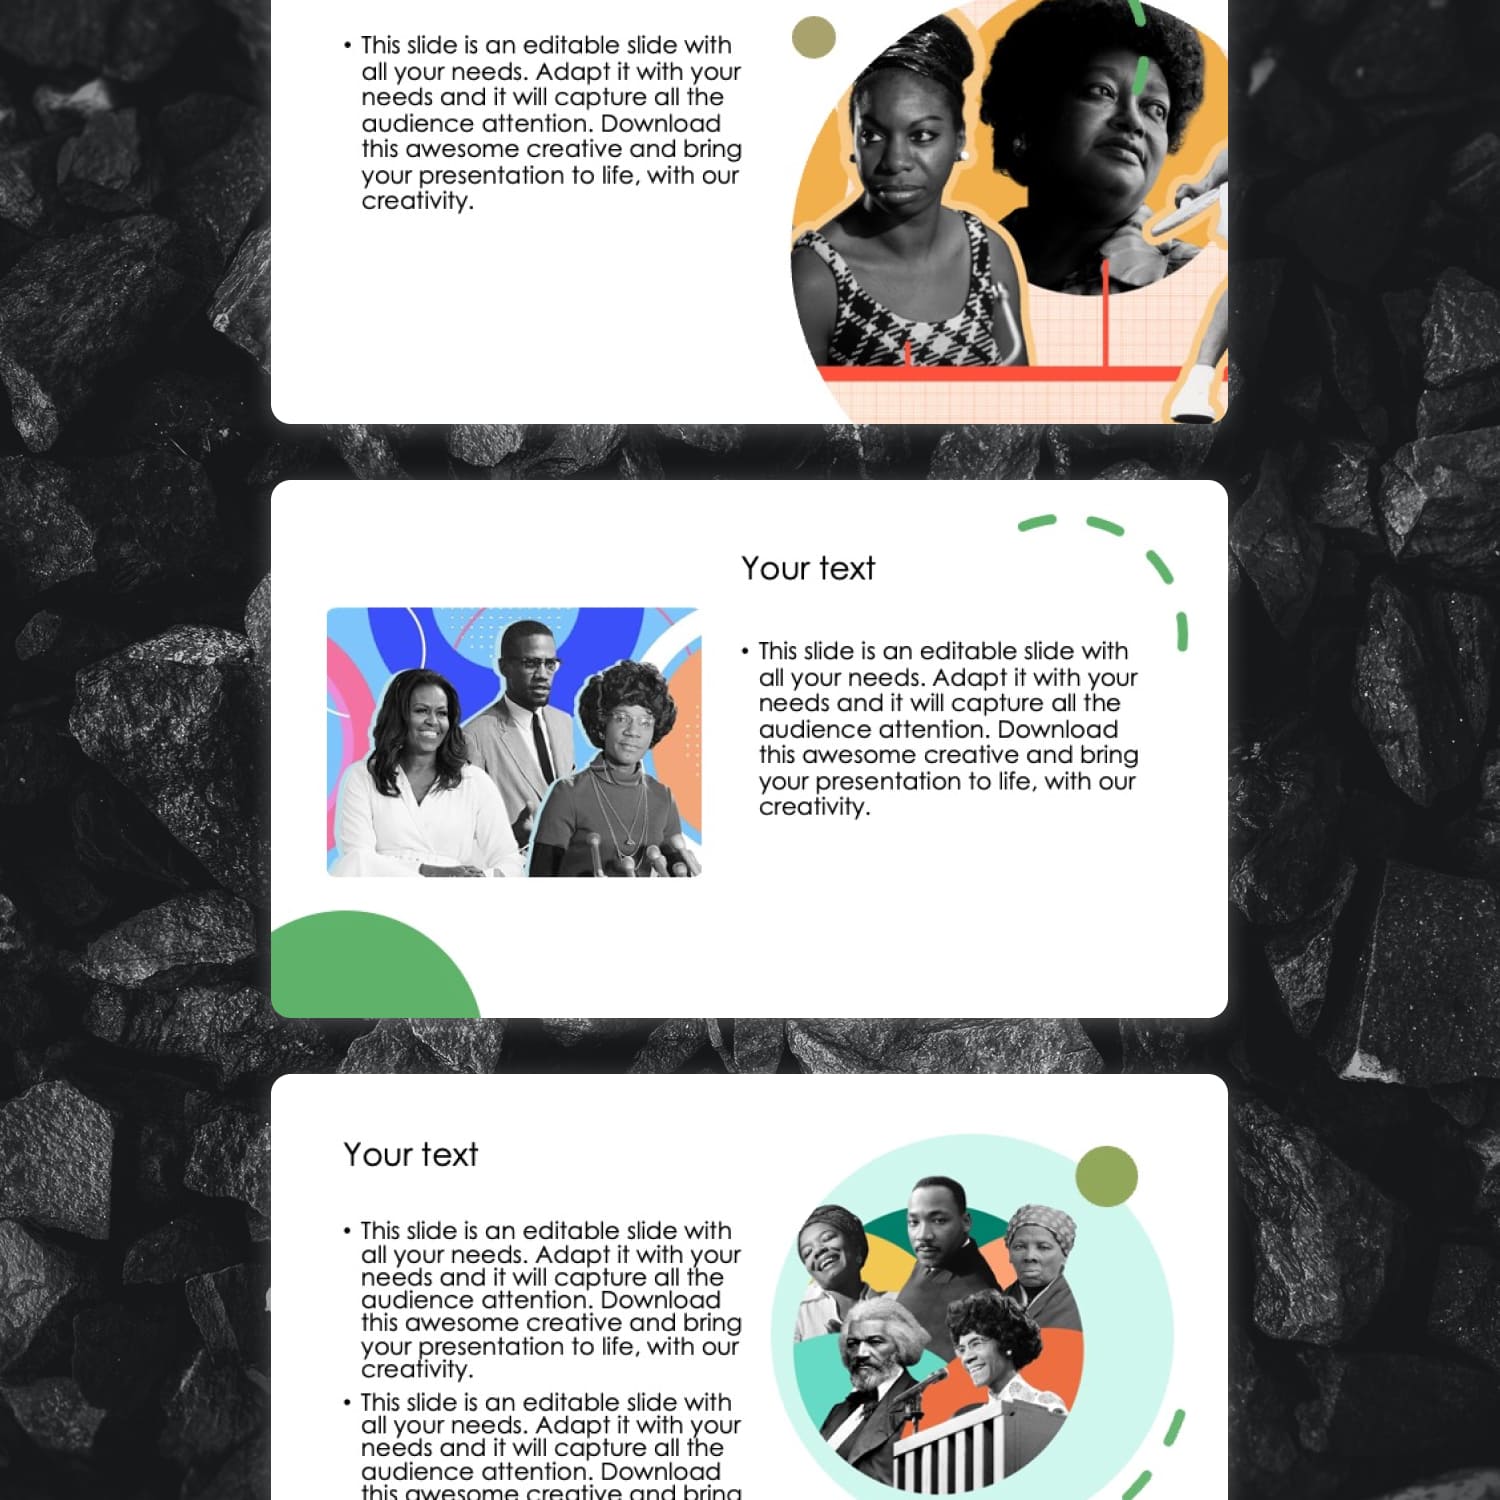 Images with Black History Powerpoint Template.